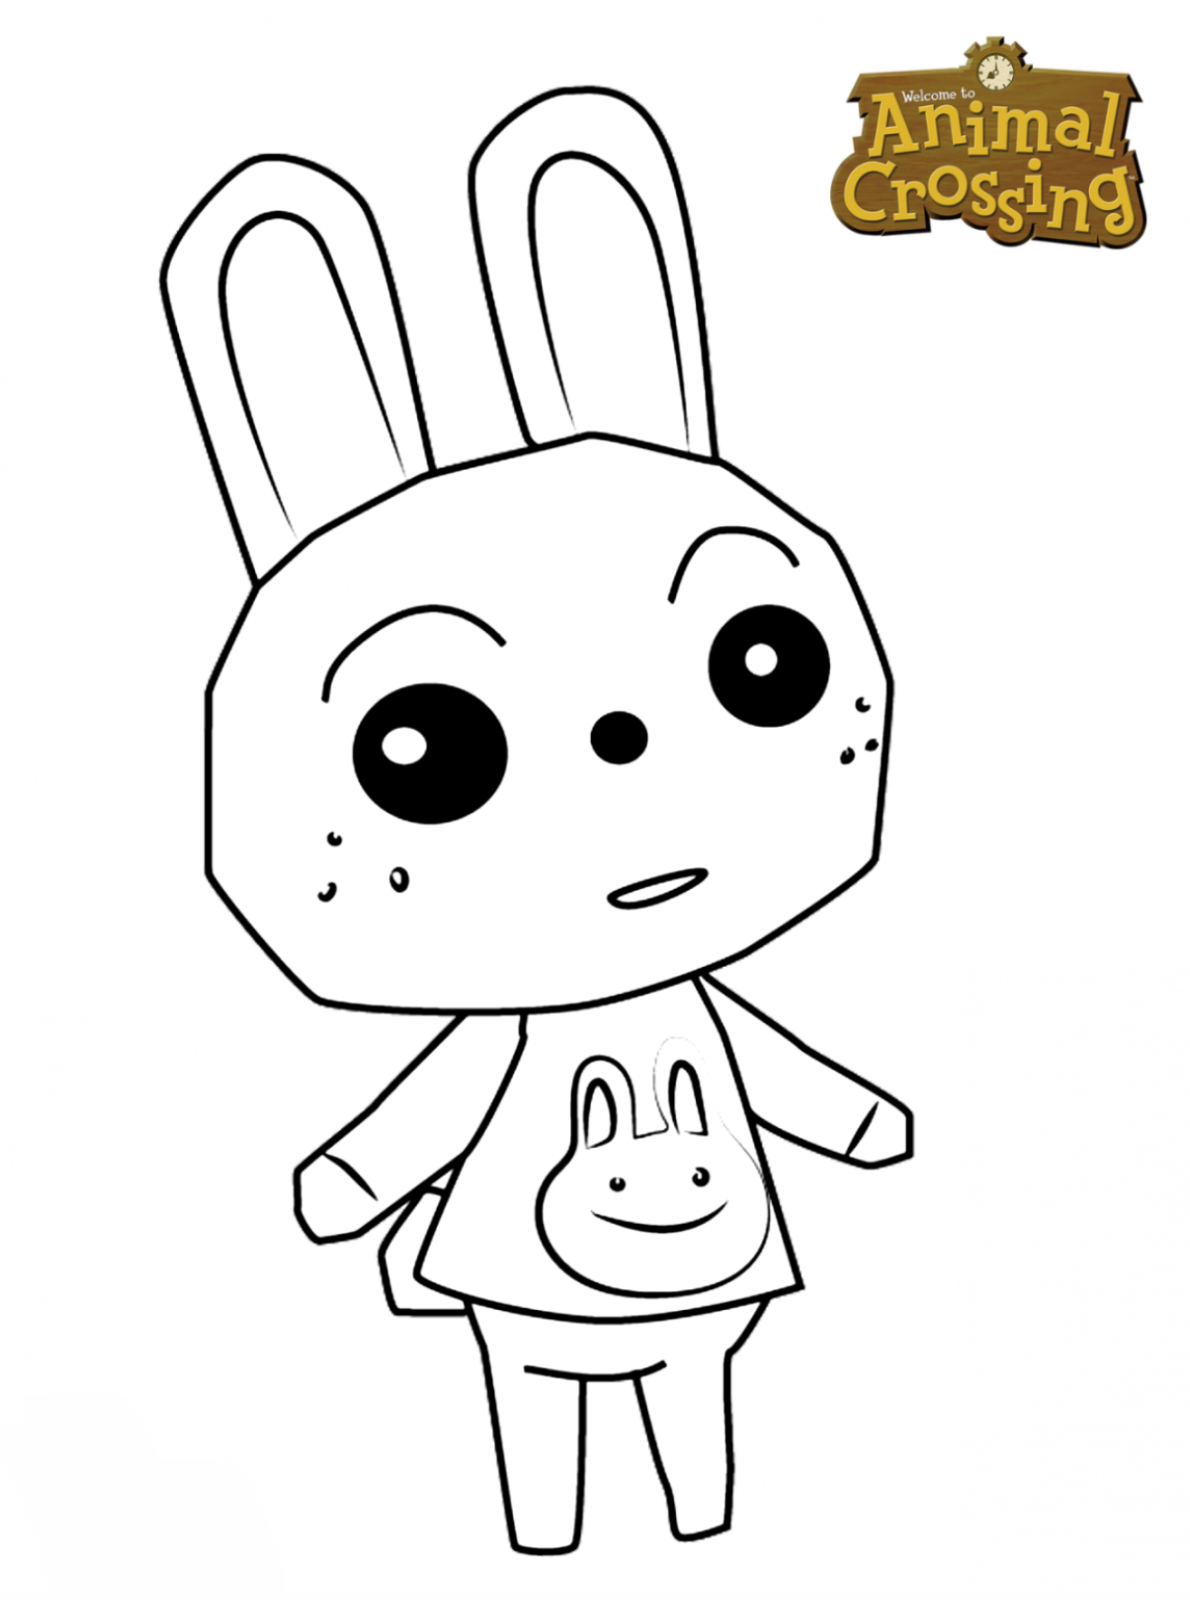 Coloring Pages Of Animal Crossing Timmy And Tommy Animal Crossing